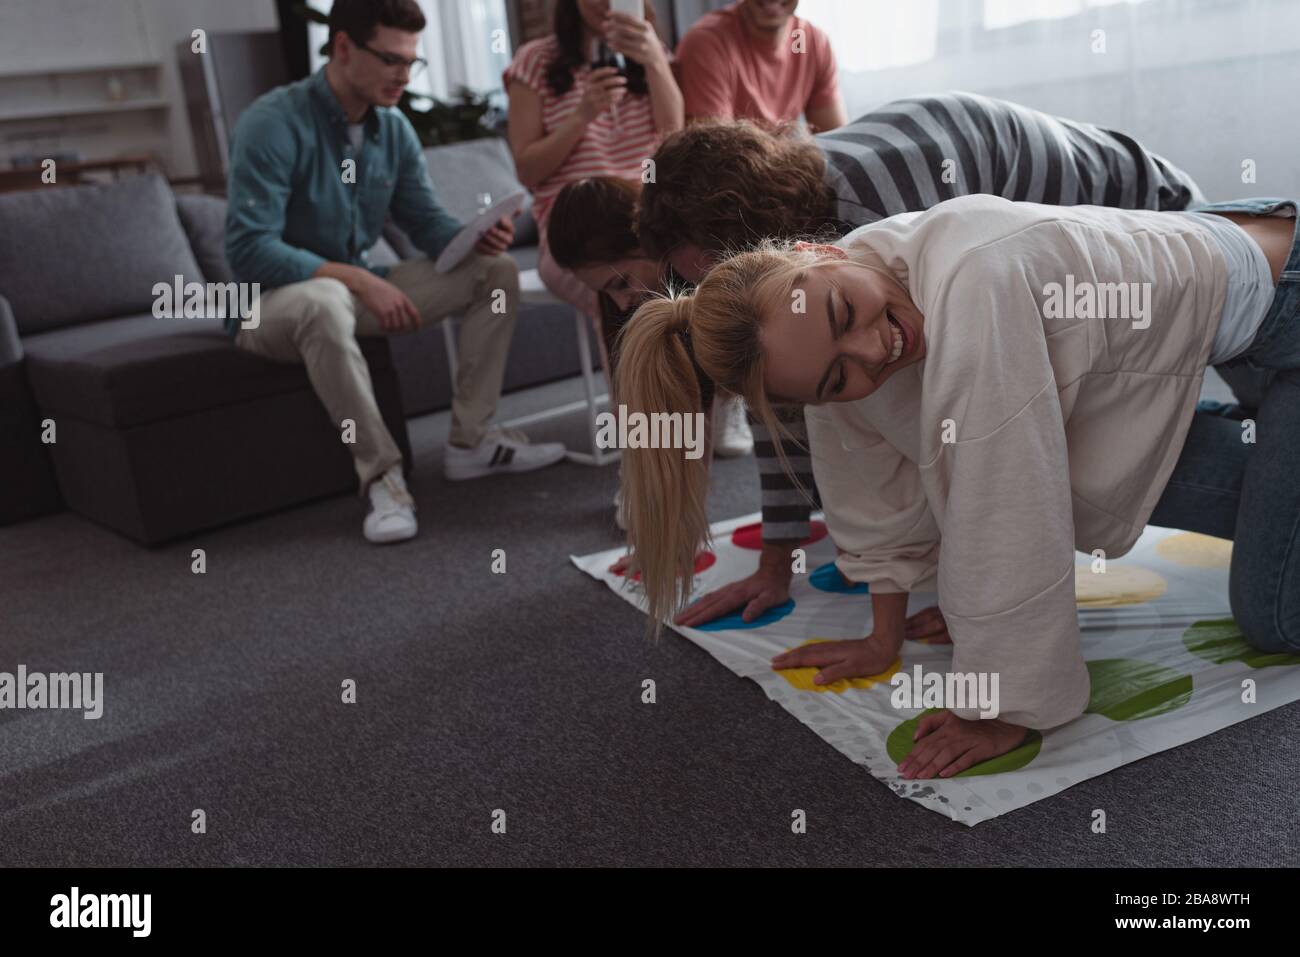 KYIV, UKRAINE - JANUARY 27, 2020: cheerful friends playing twister game while others resting on sofa Stock Photo